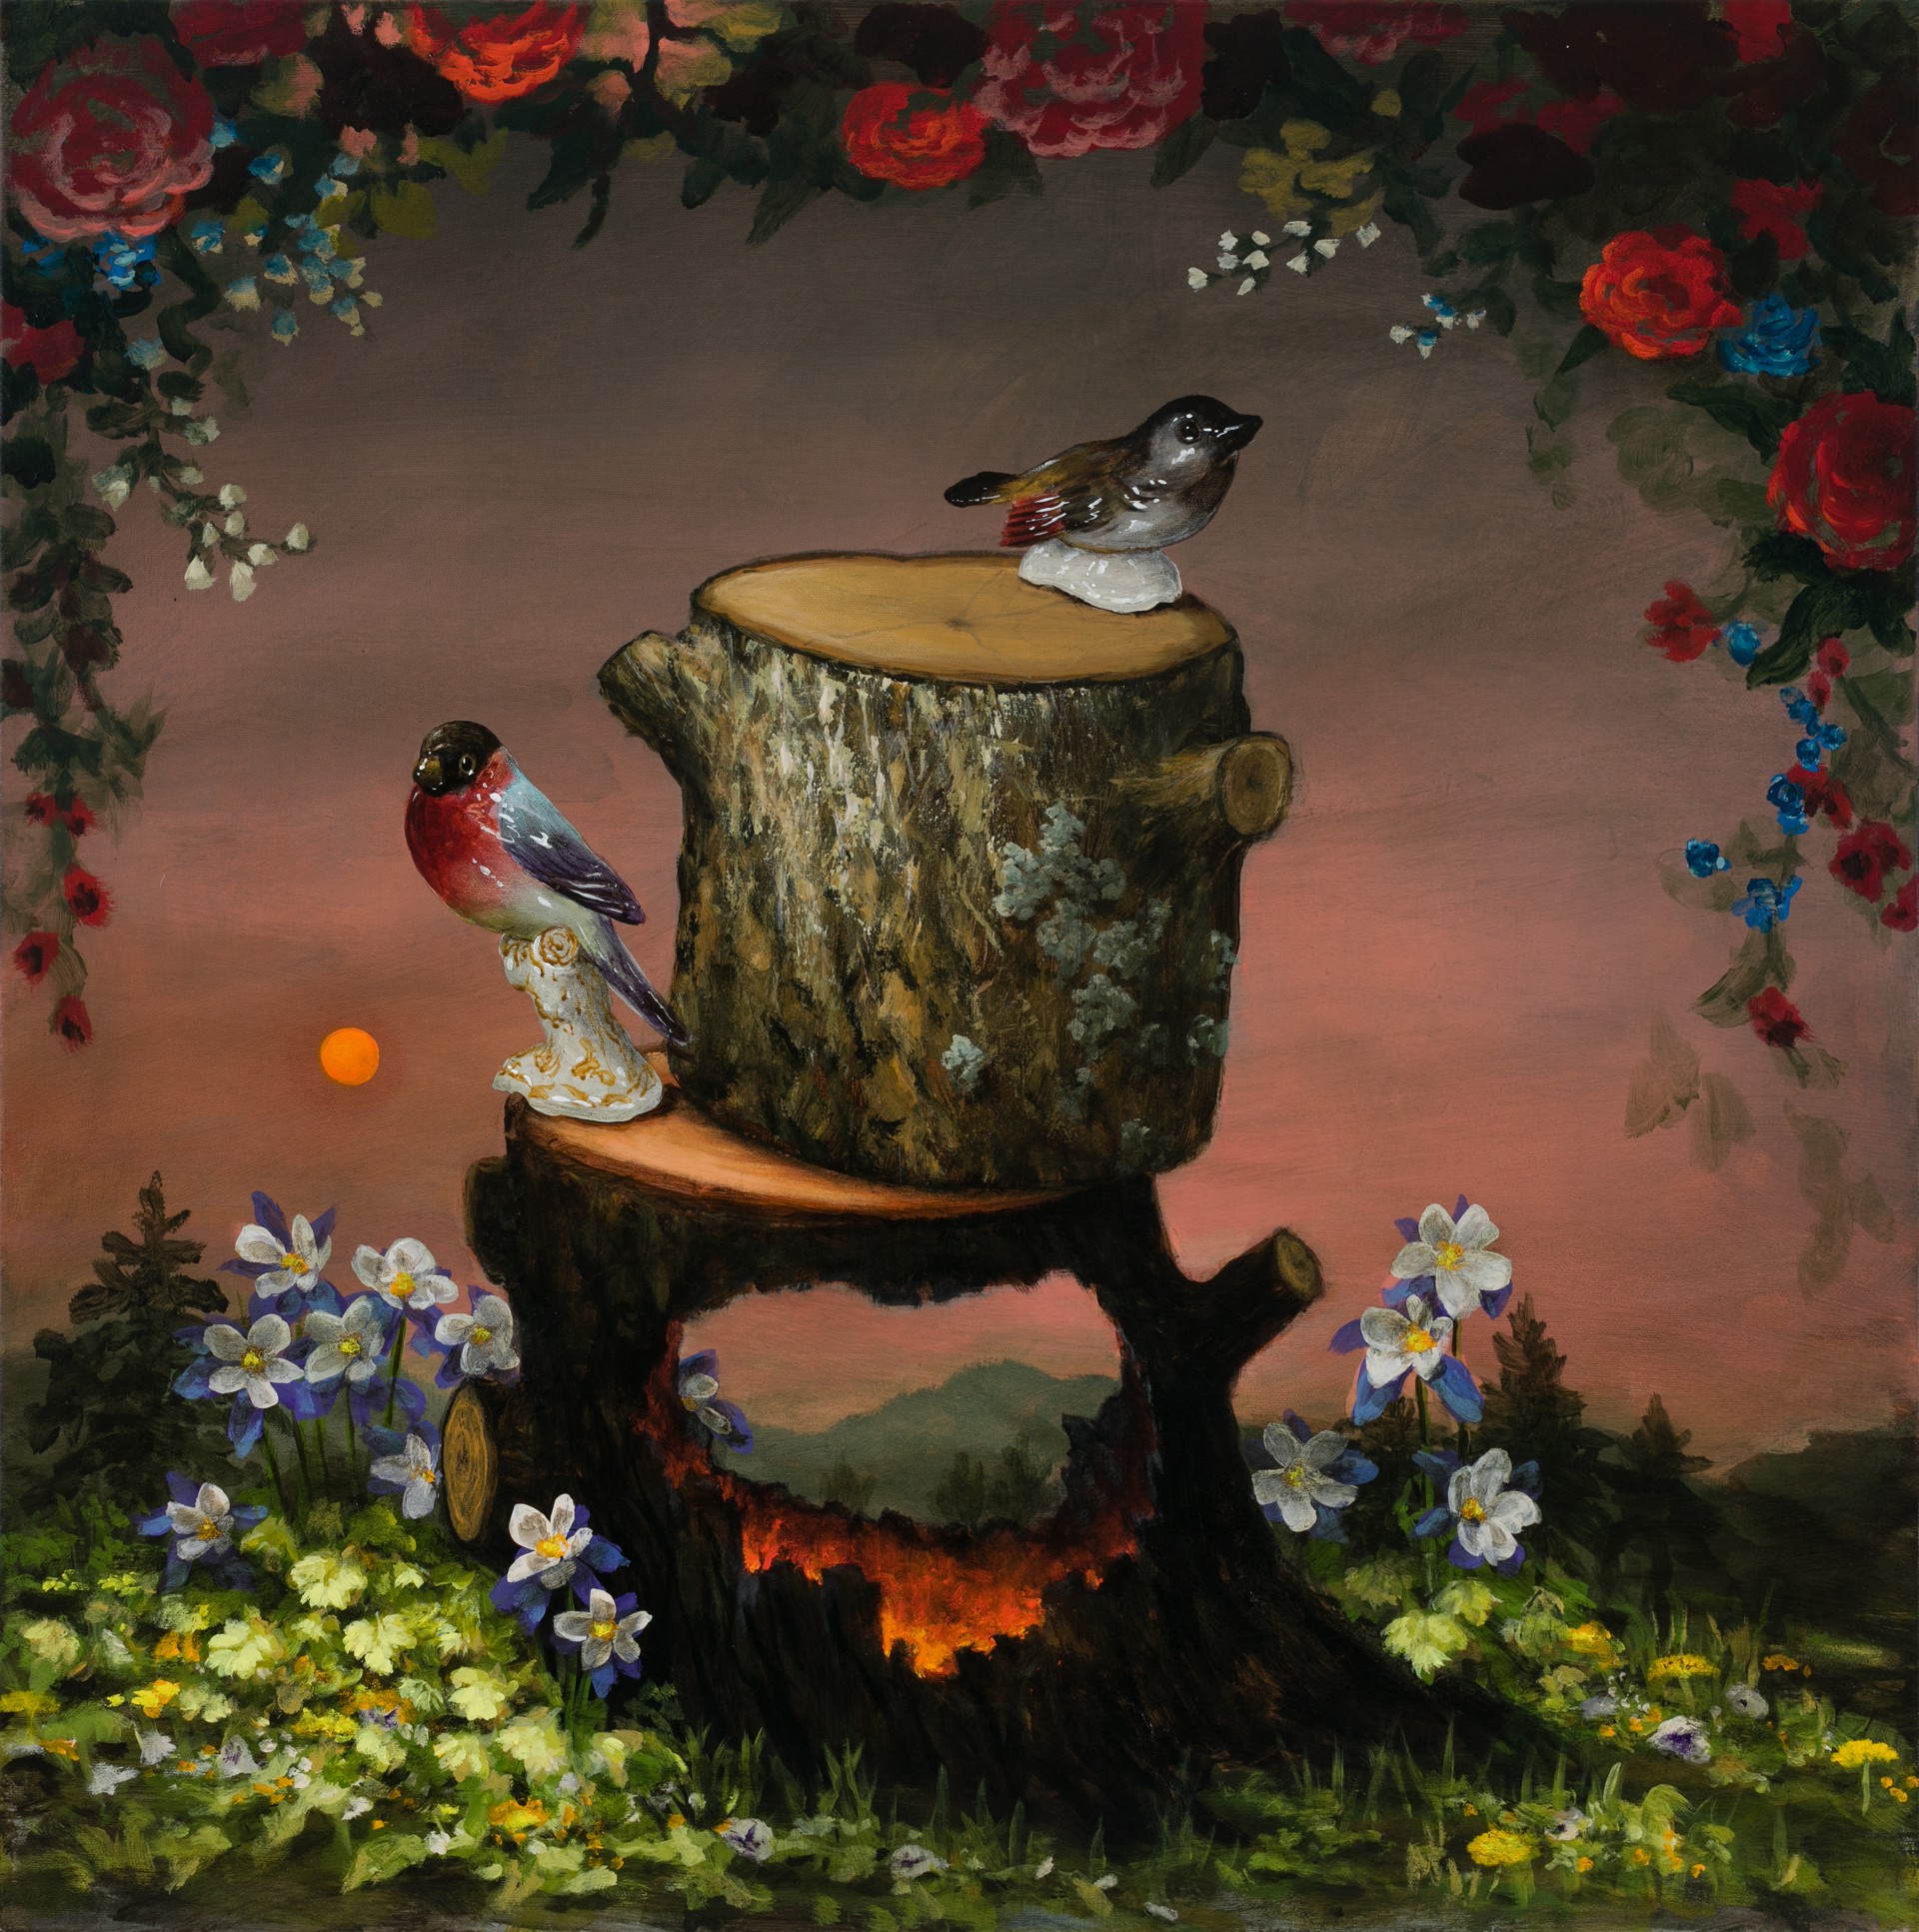 Forest Descanso by Kevin Sloan